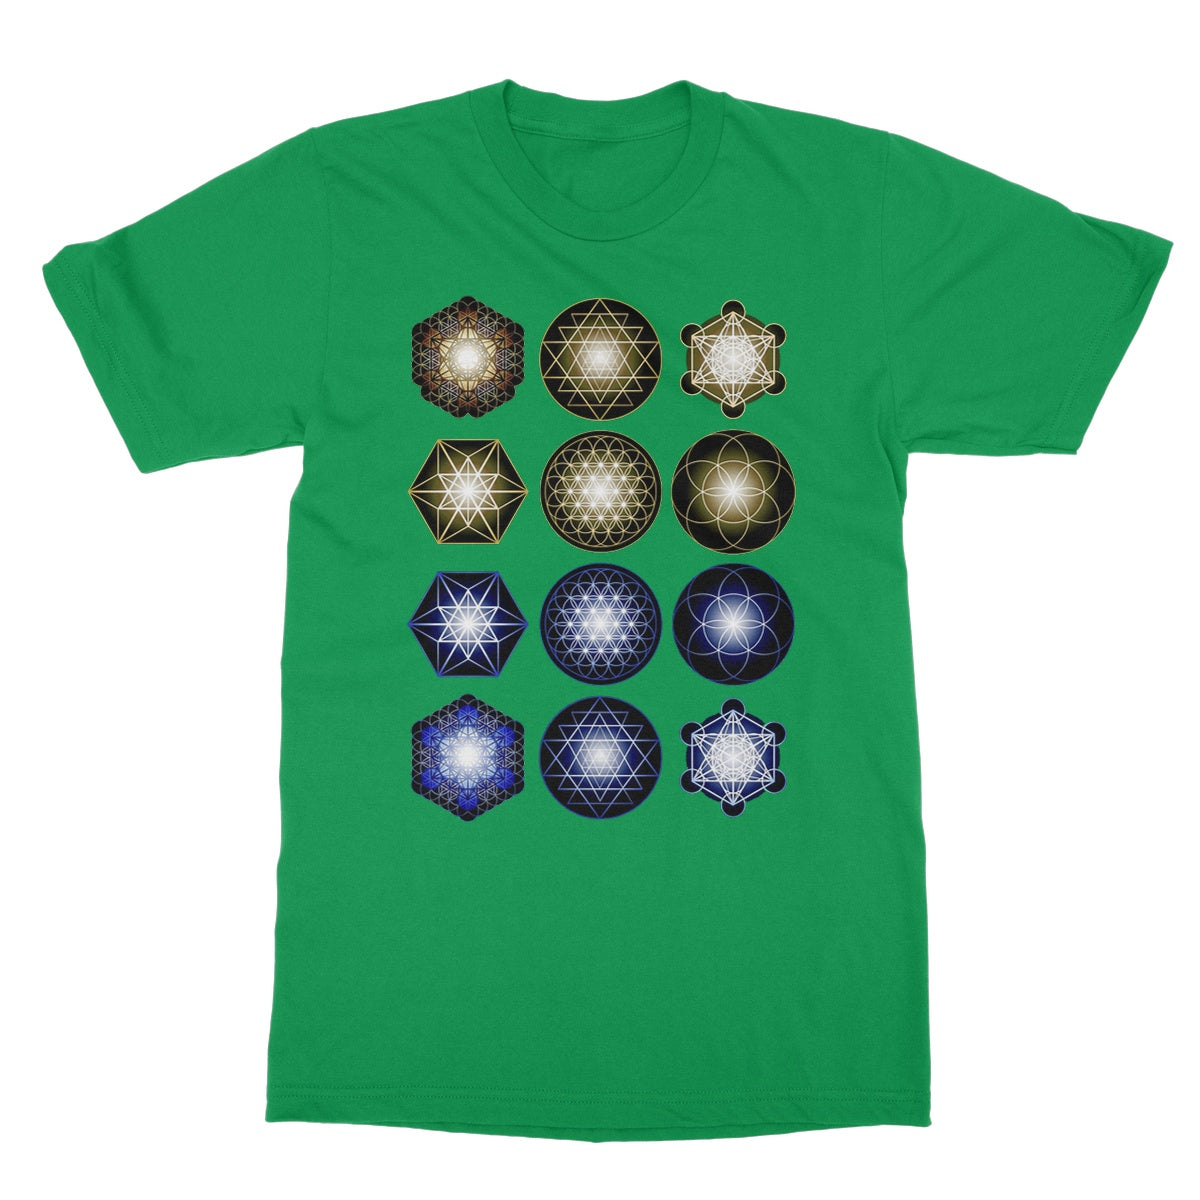 Sacred Geometry in Gold and Blue Softstyle T-Shirt